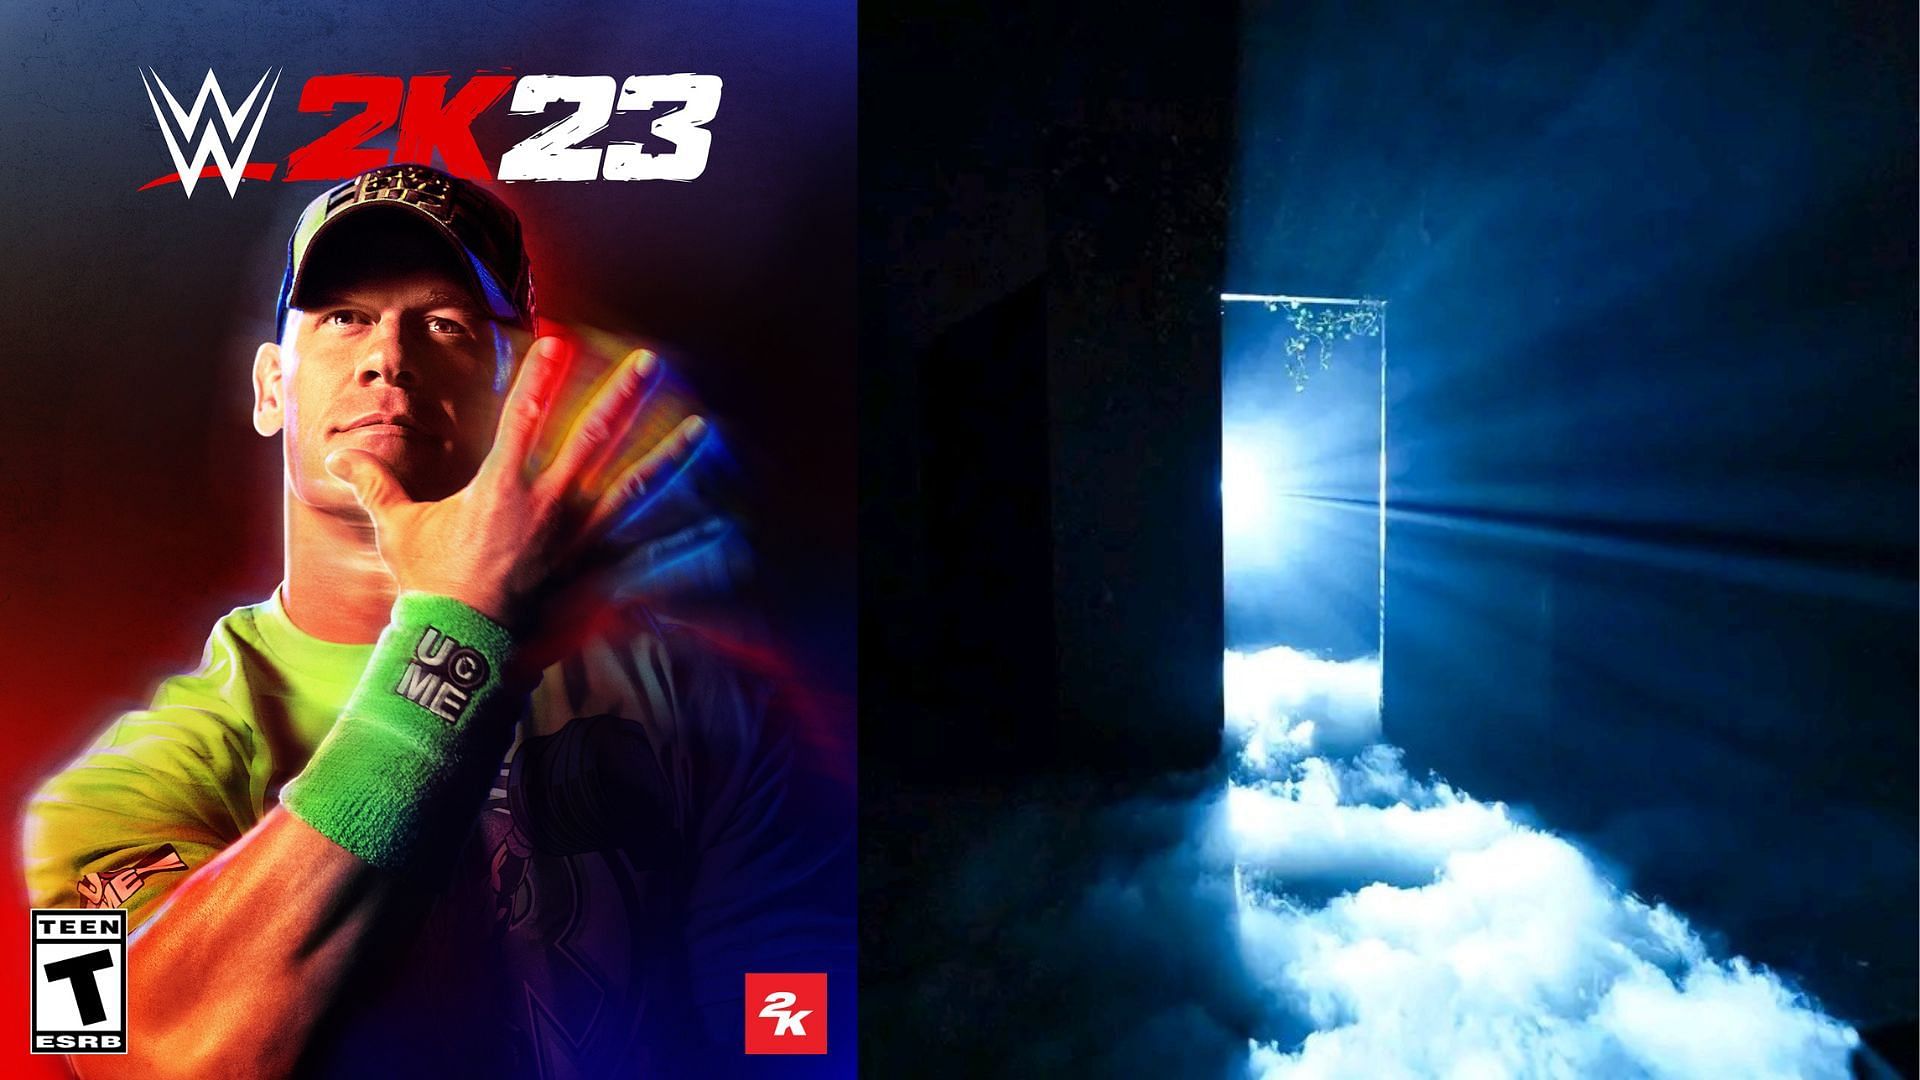 Several prolific stars may not feature in 2K23